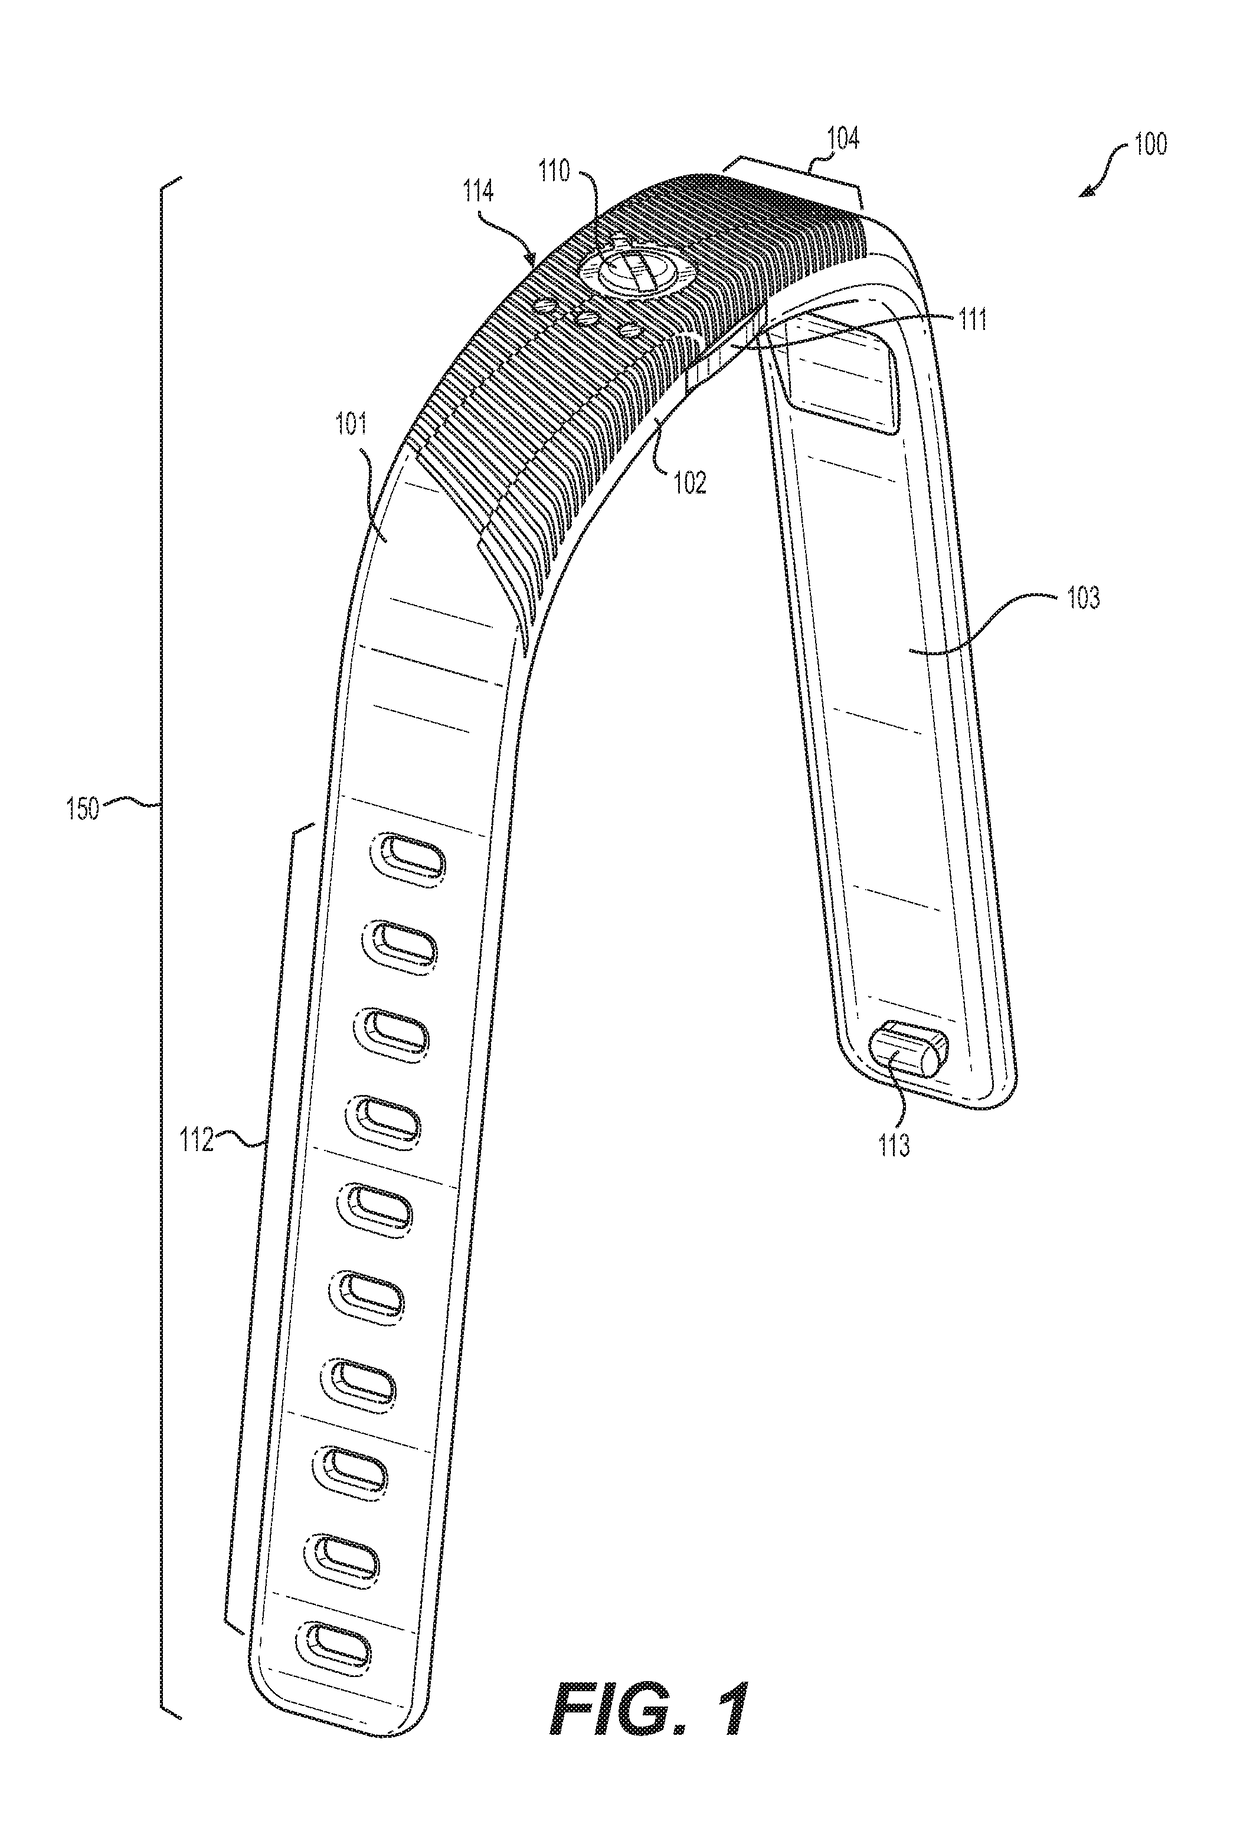 Wearable device and application for behavioral support